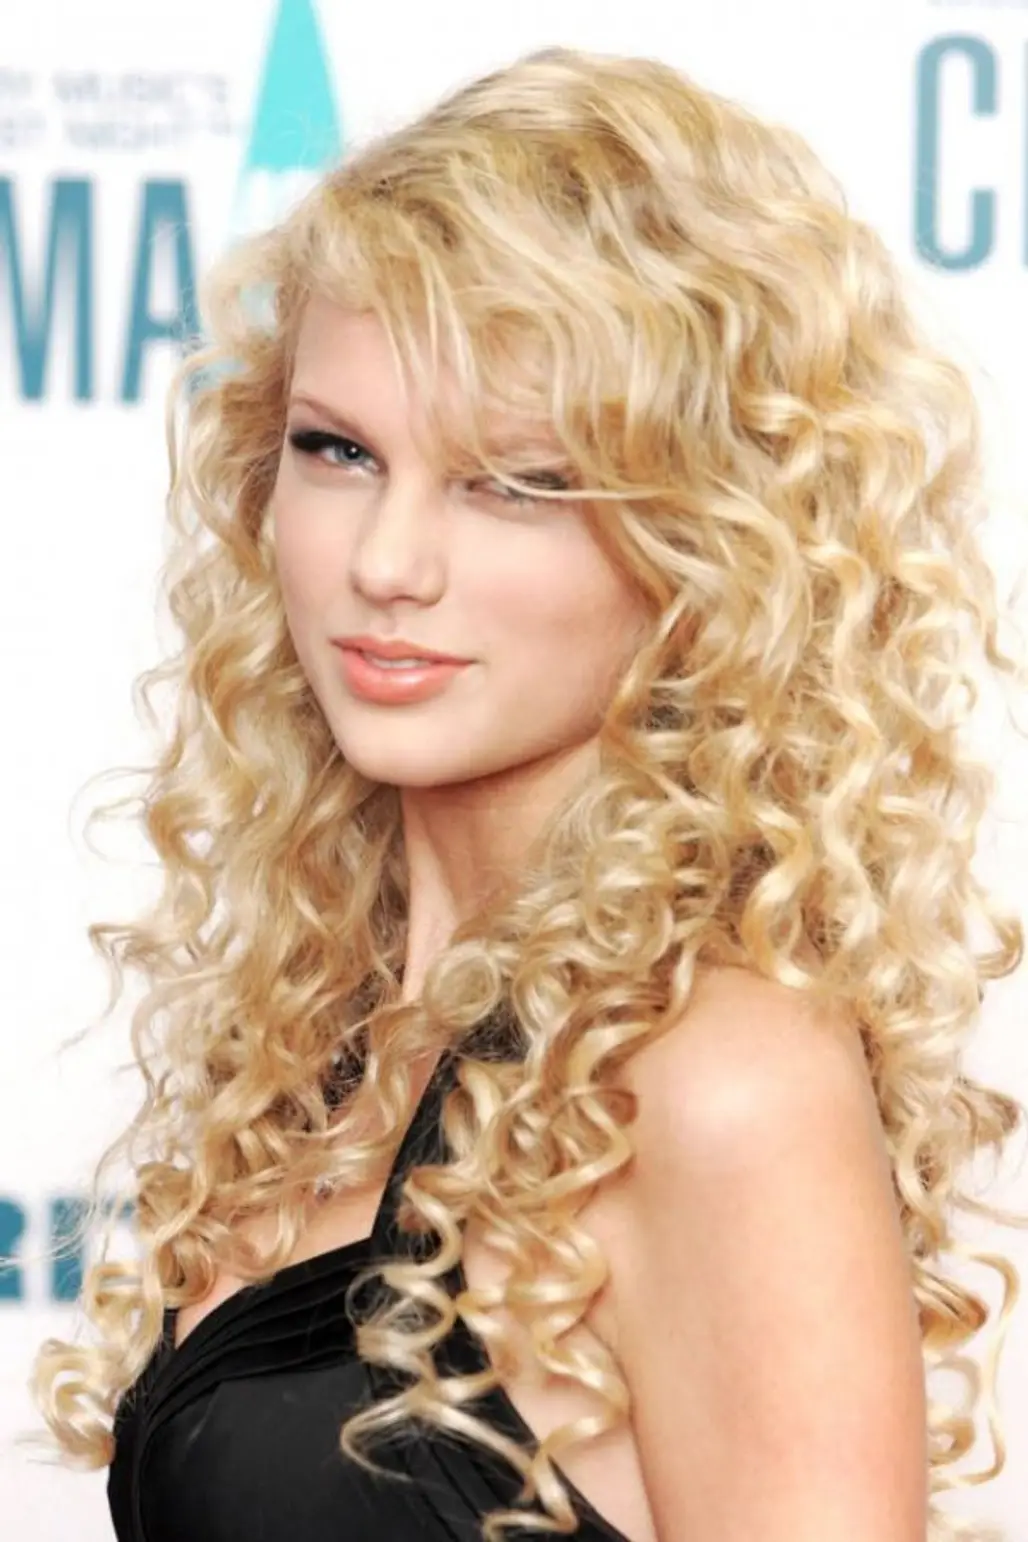 The Curls!